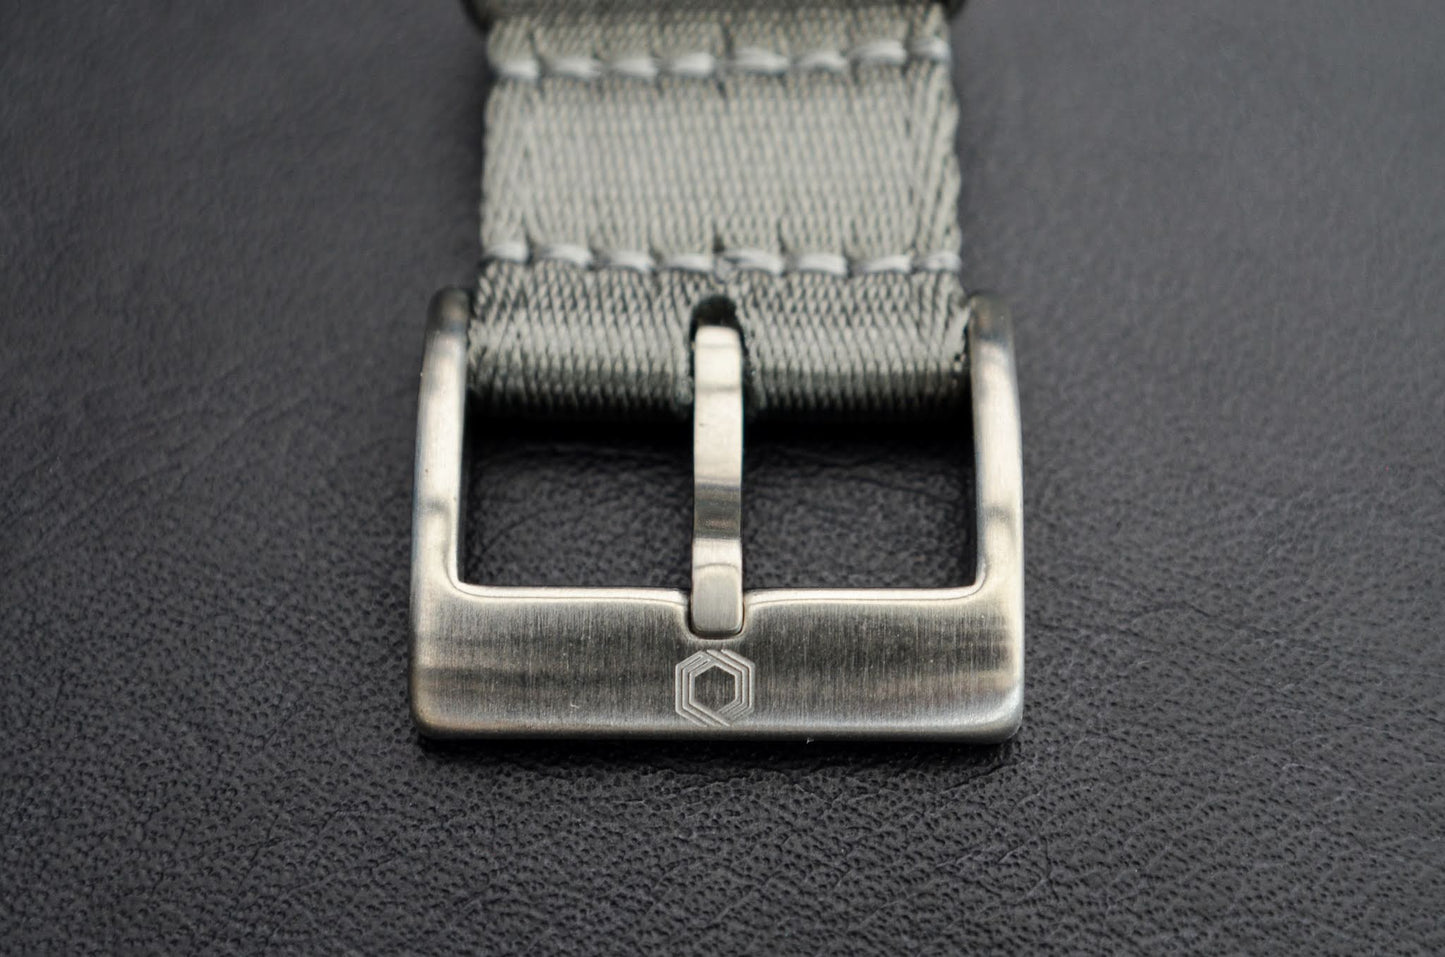 The 'CJM' - Grey adjustable military watch strap made of a soft seat belt nylon